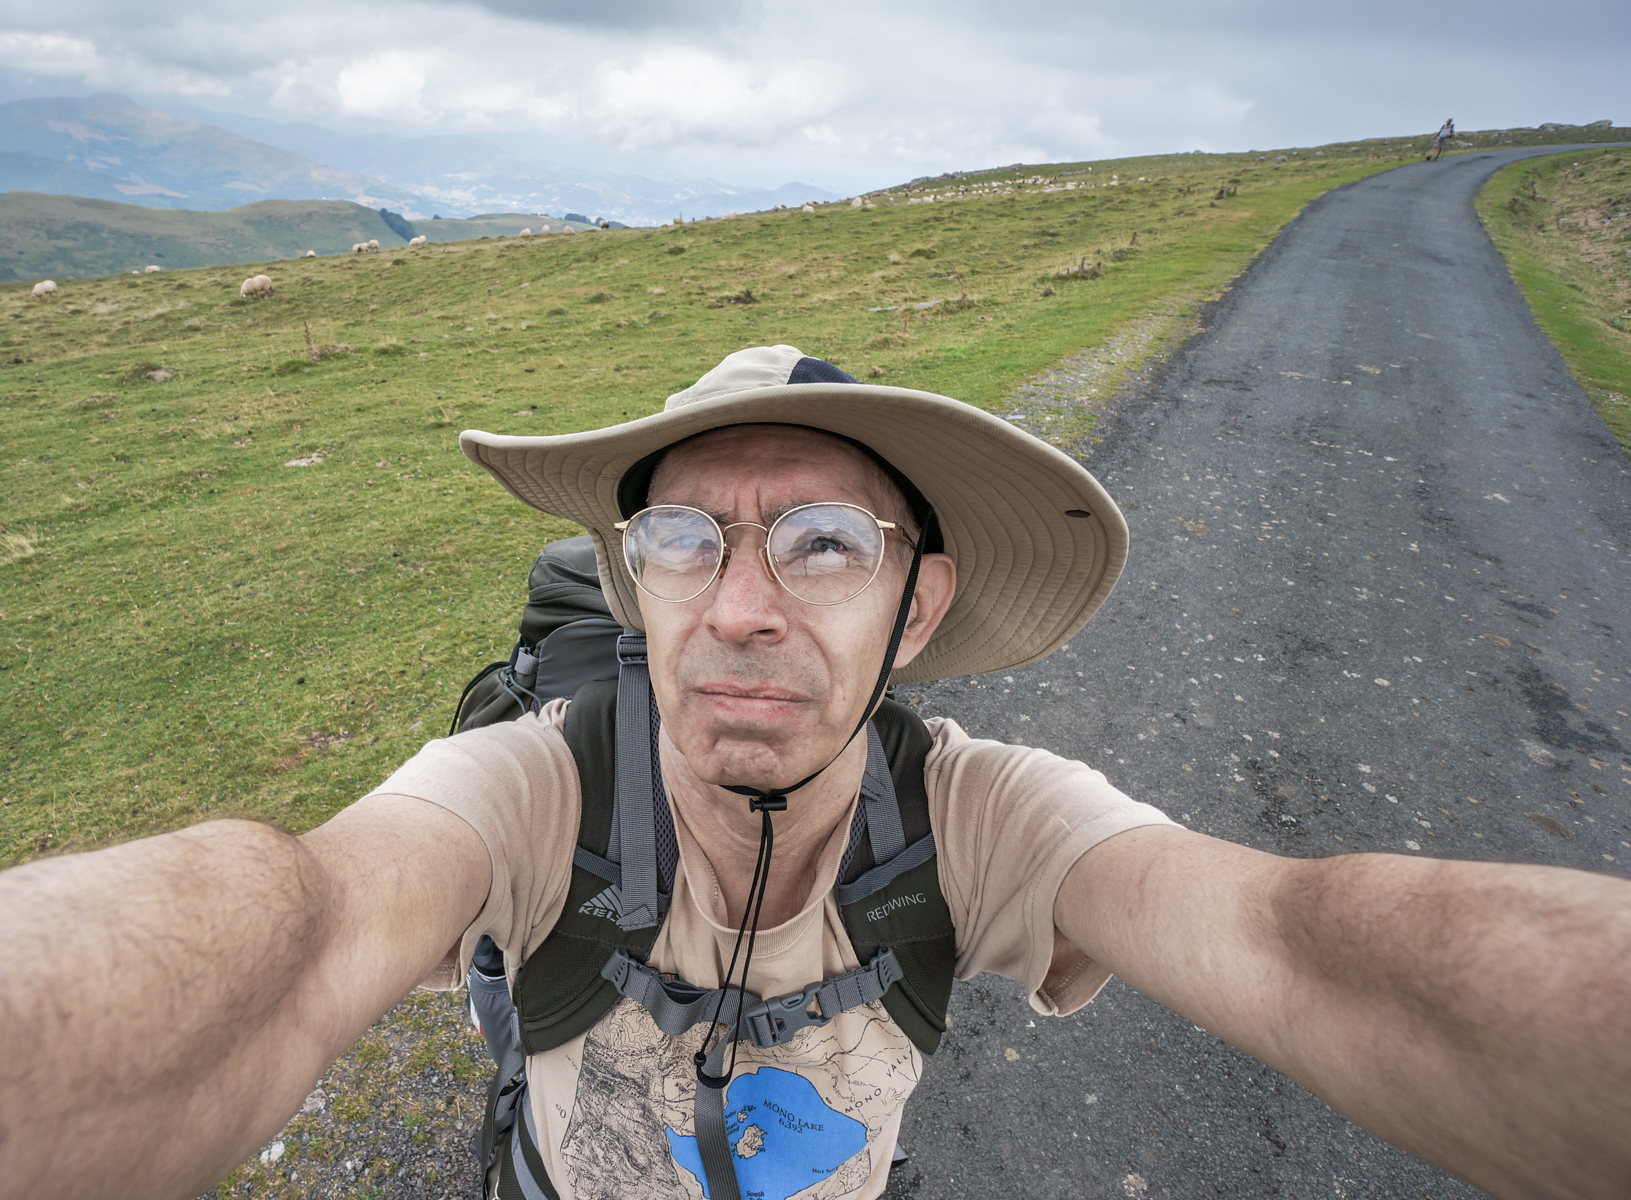 Self-portrait of pilgrim and photographer Mike Hudak on the Camino Frances with domesticated sheep in the Pyrenees 13.7 km from Saint-Jean-Pied-de-Port | Photo by Mike Hudak